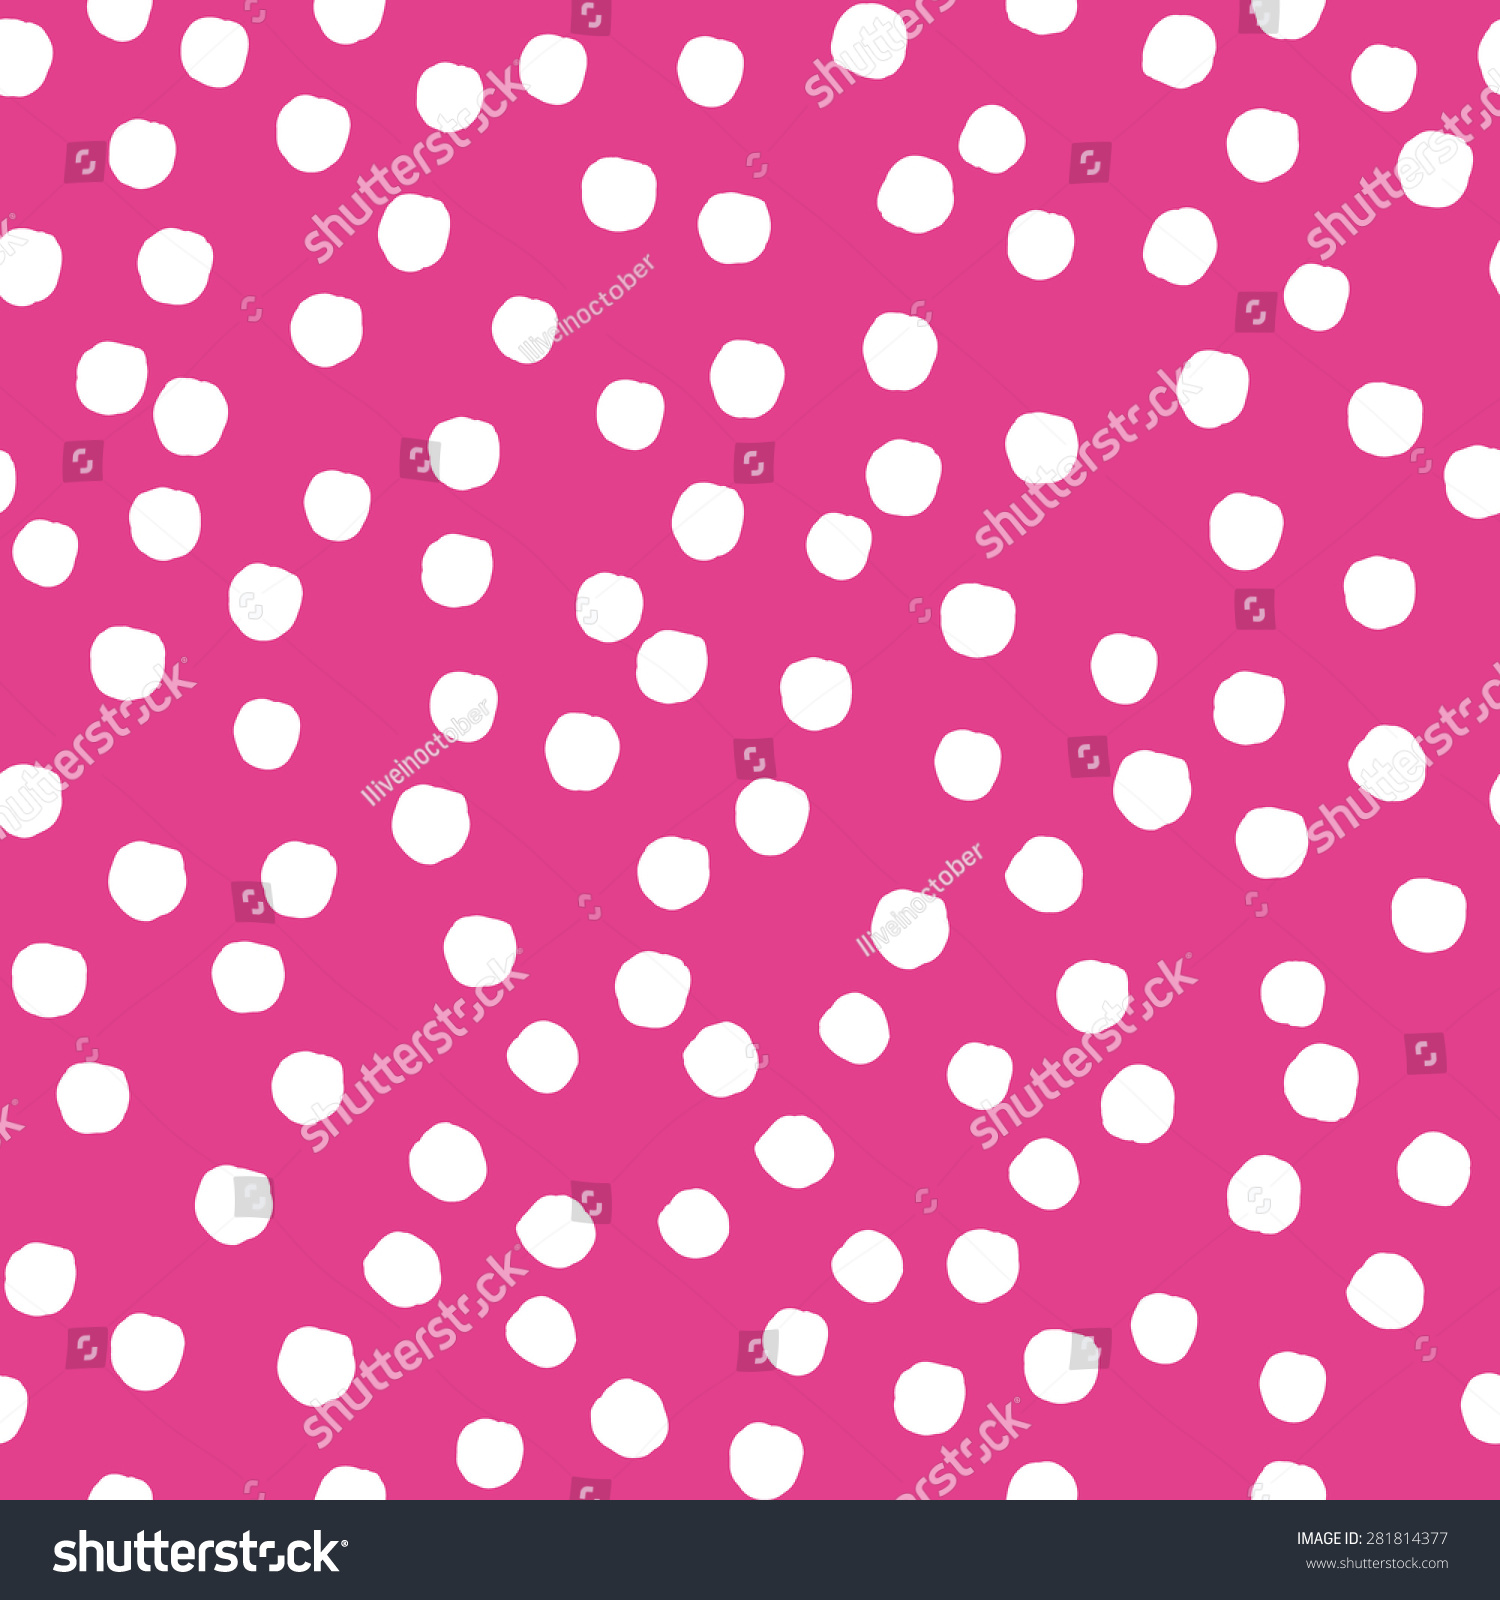 Modern Vector Background With Dots. Beautiful Polka Dots Seamless ...